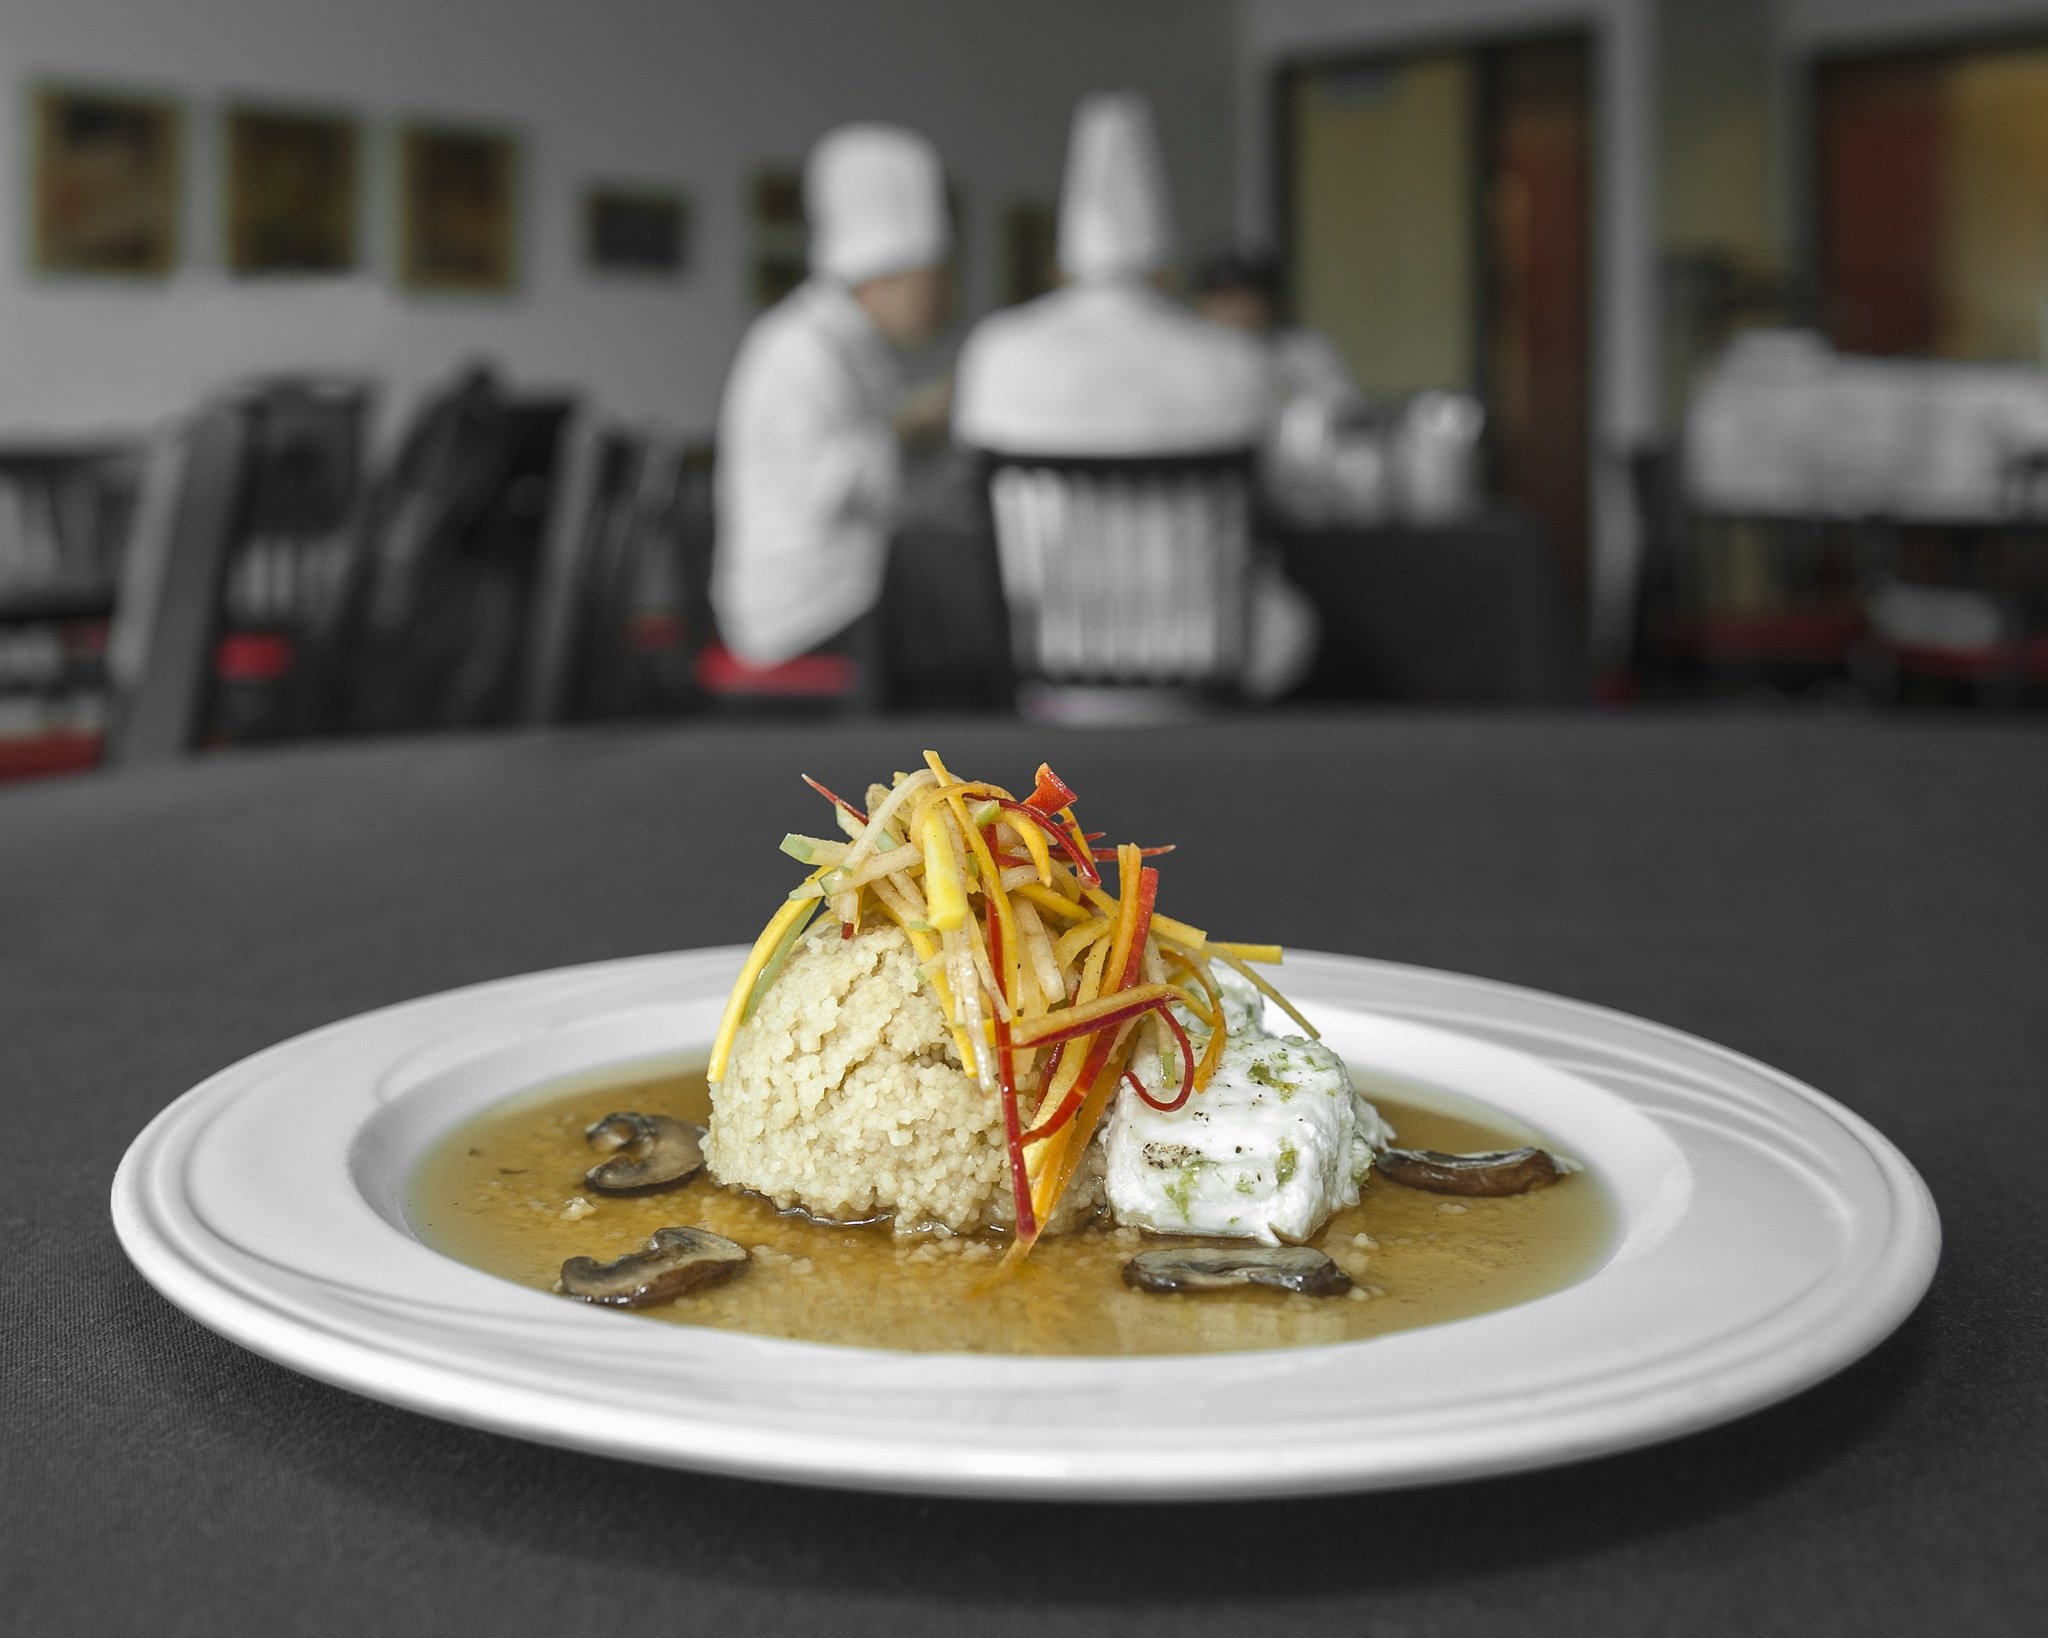 Close up of a prepared plate of halibut with culinary judges blurred in a background.